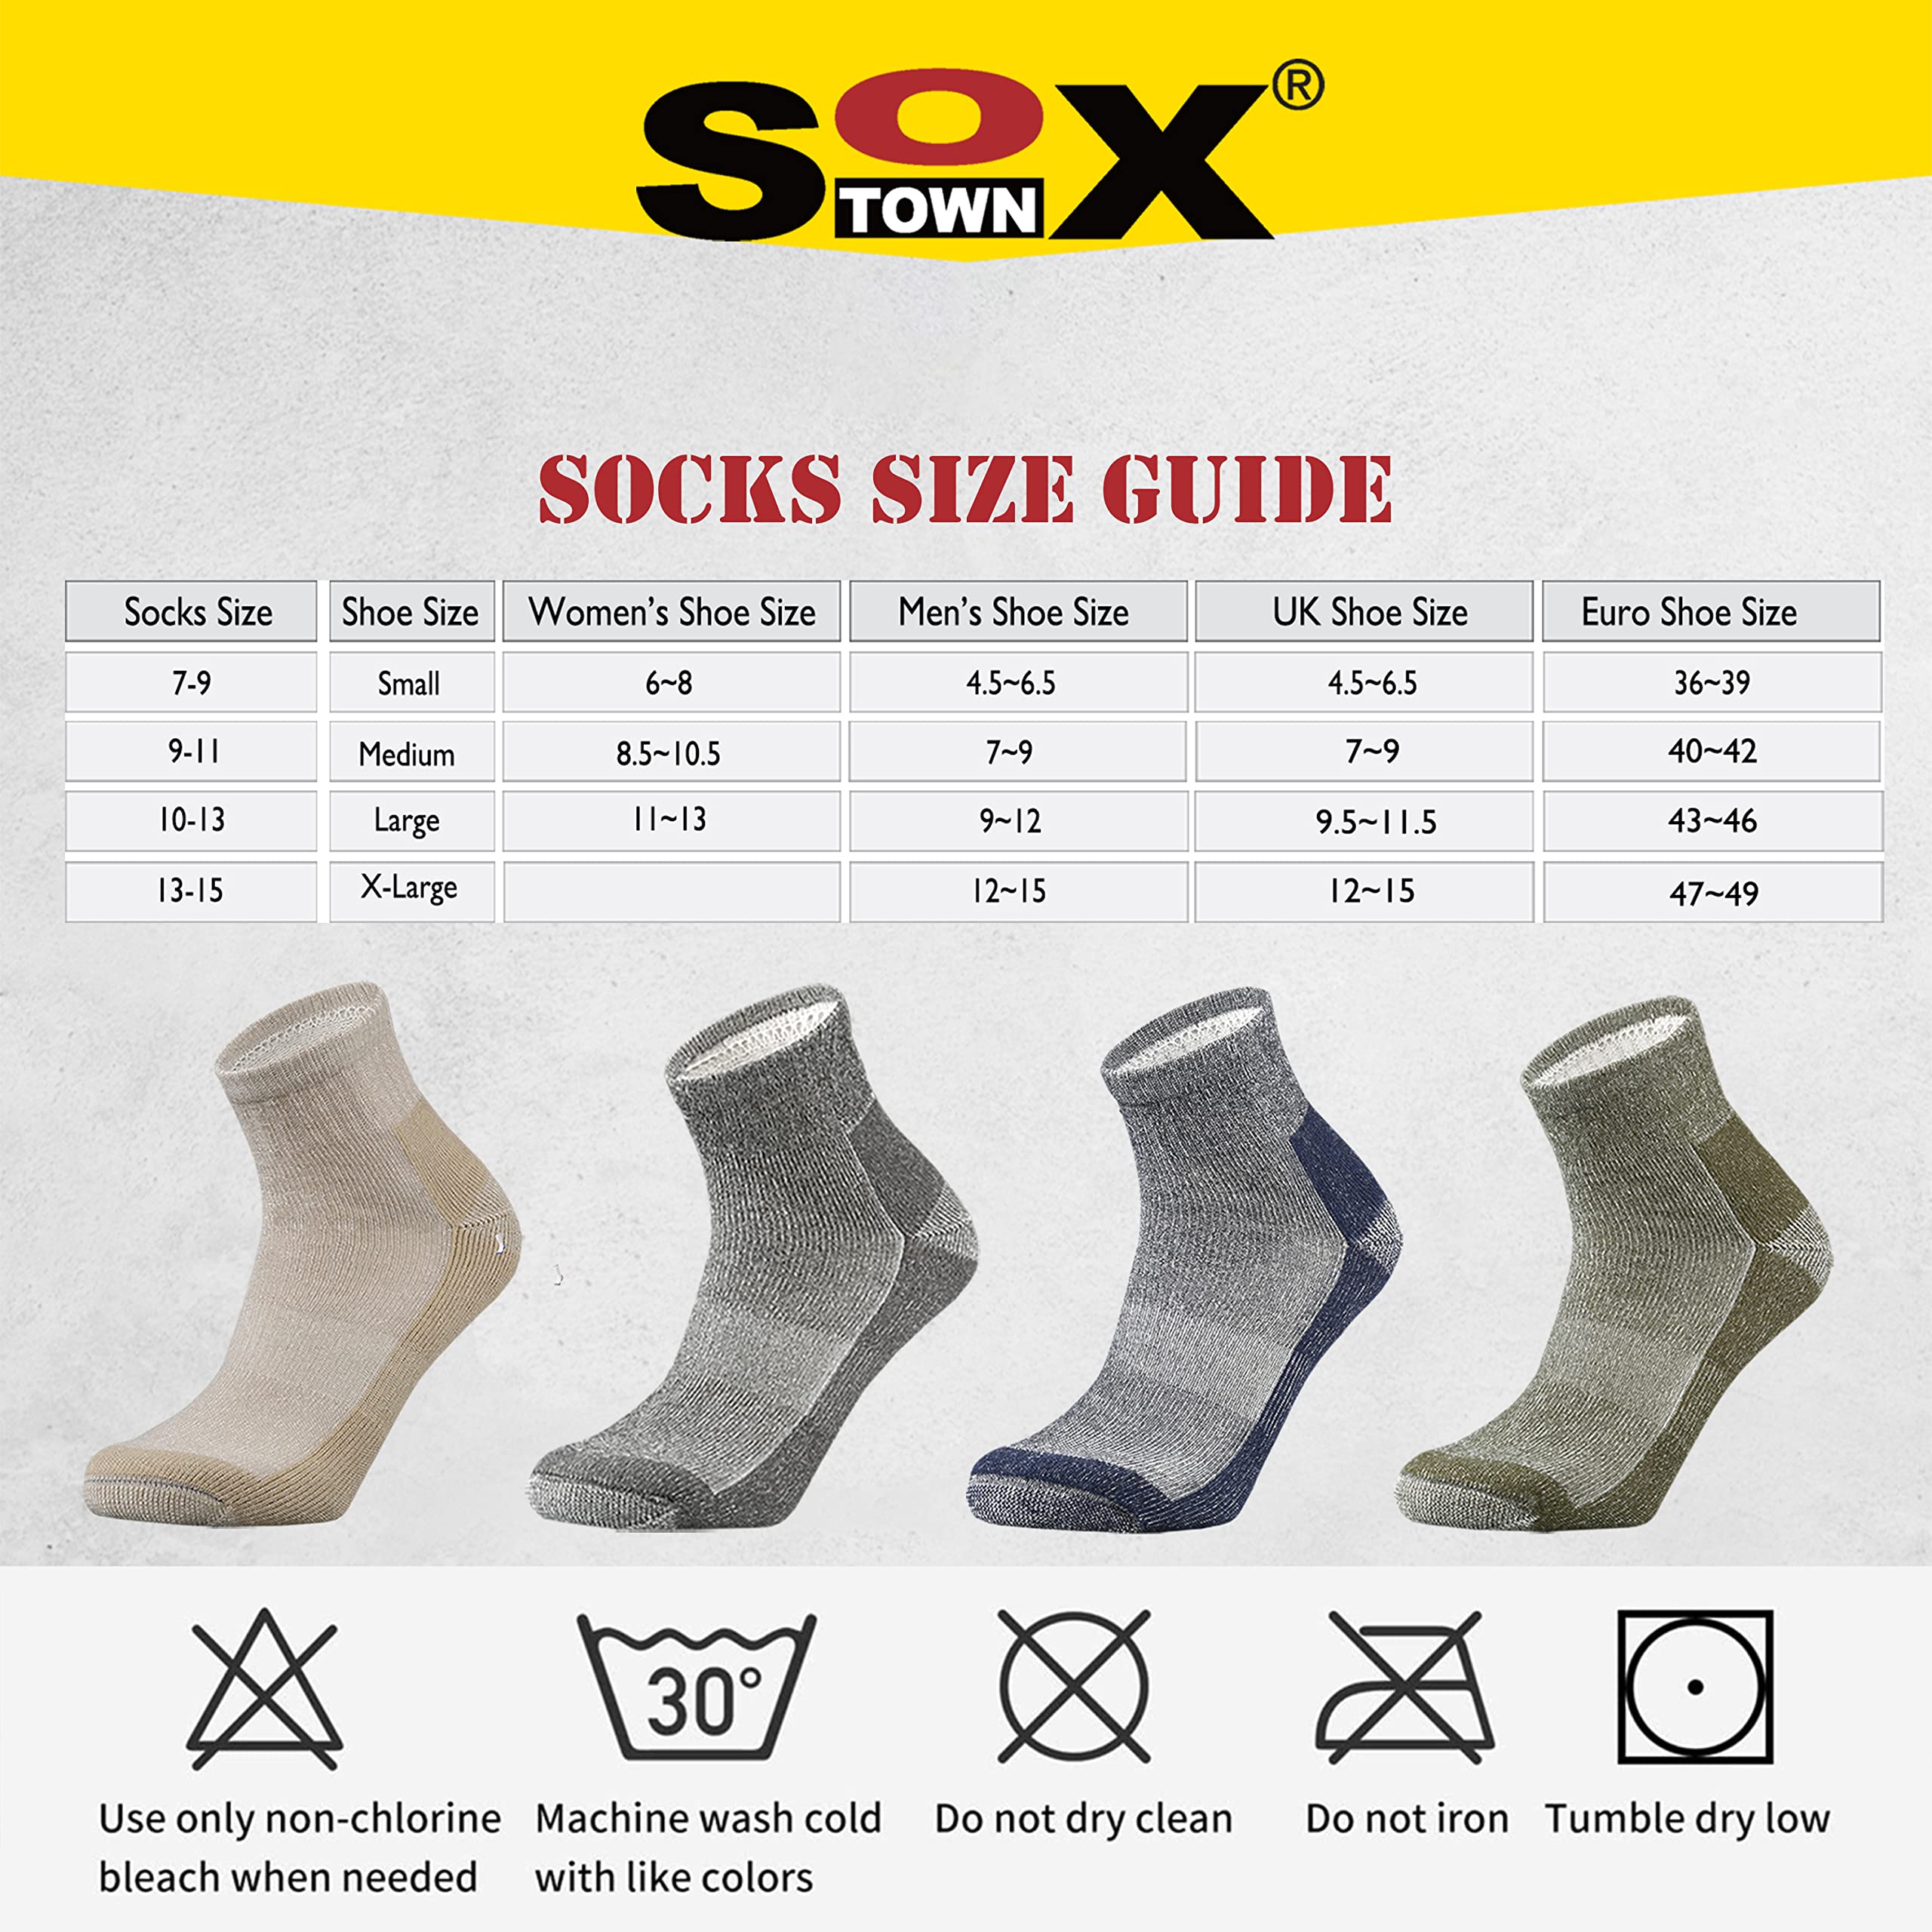 SOX TOWN Merino Wool Low Cut Quarter Socks with Heavy Cushion Ankle Moisture Wicking Warm for Men Outdoor Hiking Hike Cycling(Black L)